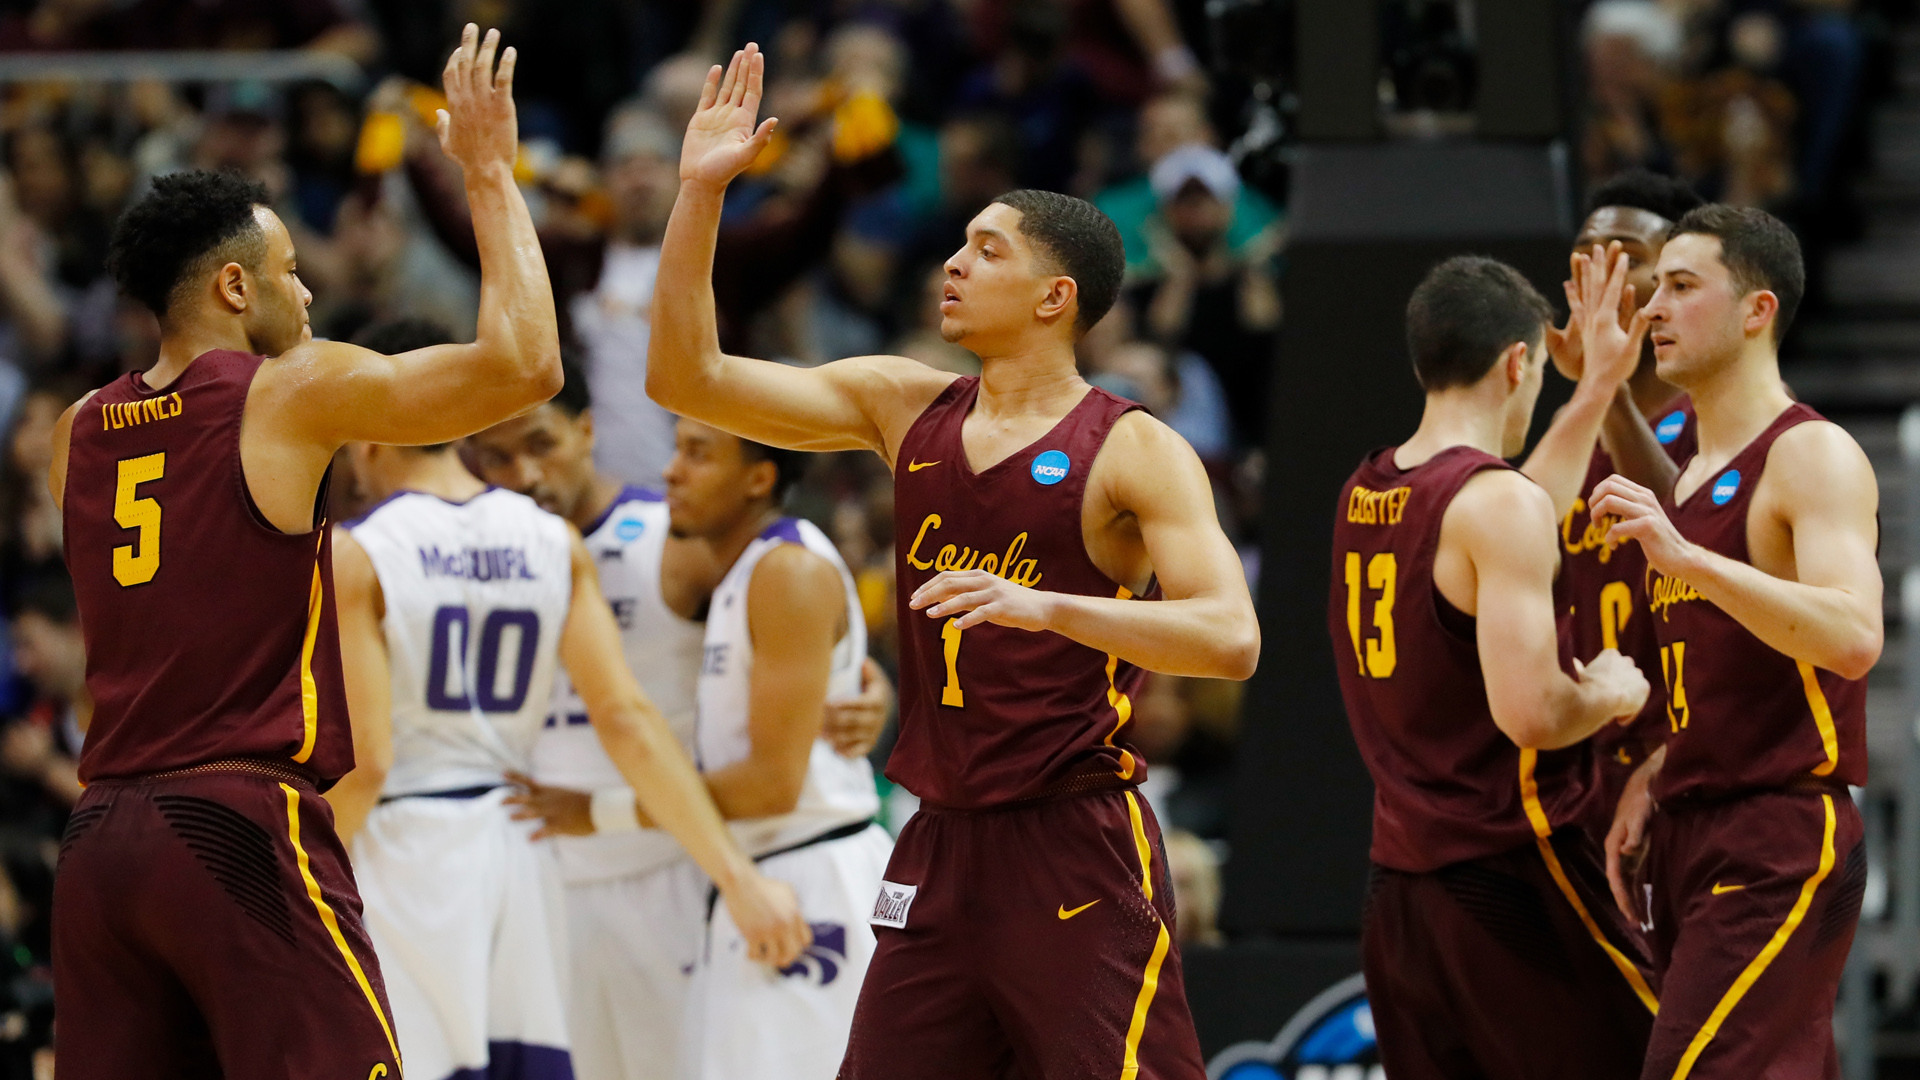 March Madness 2018: Three takeaways from Loyola-Chicago's Elite 8 win